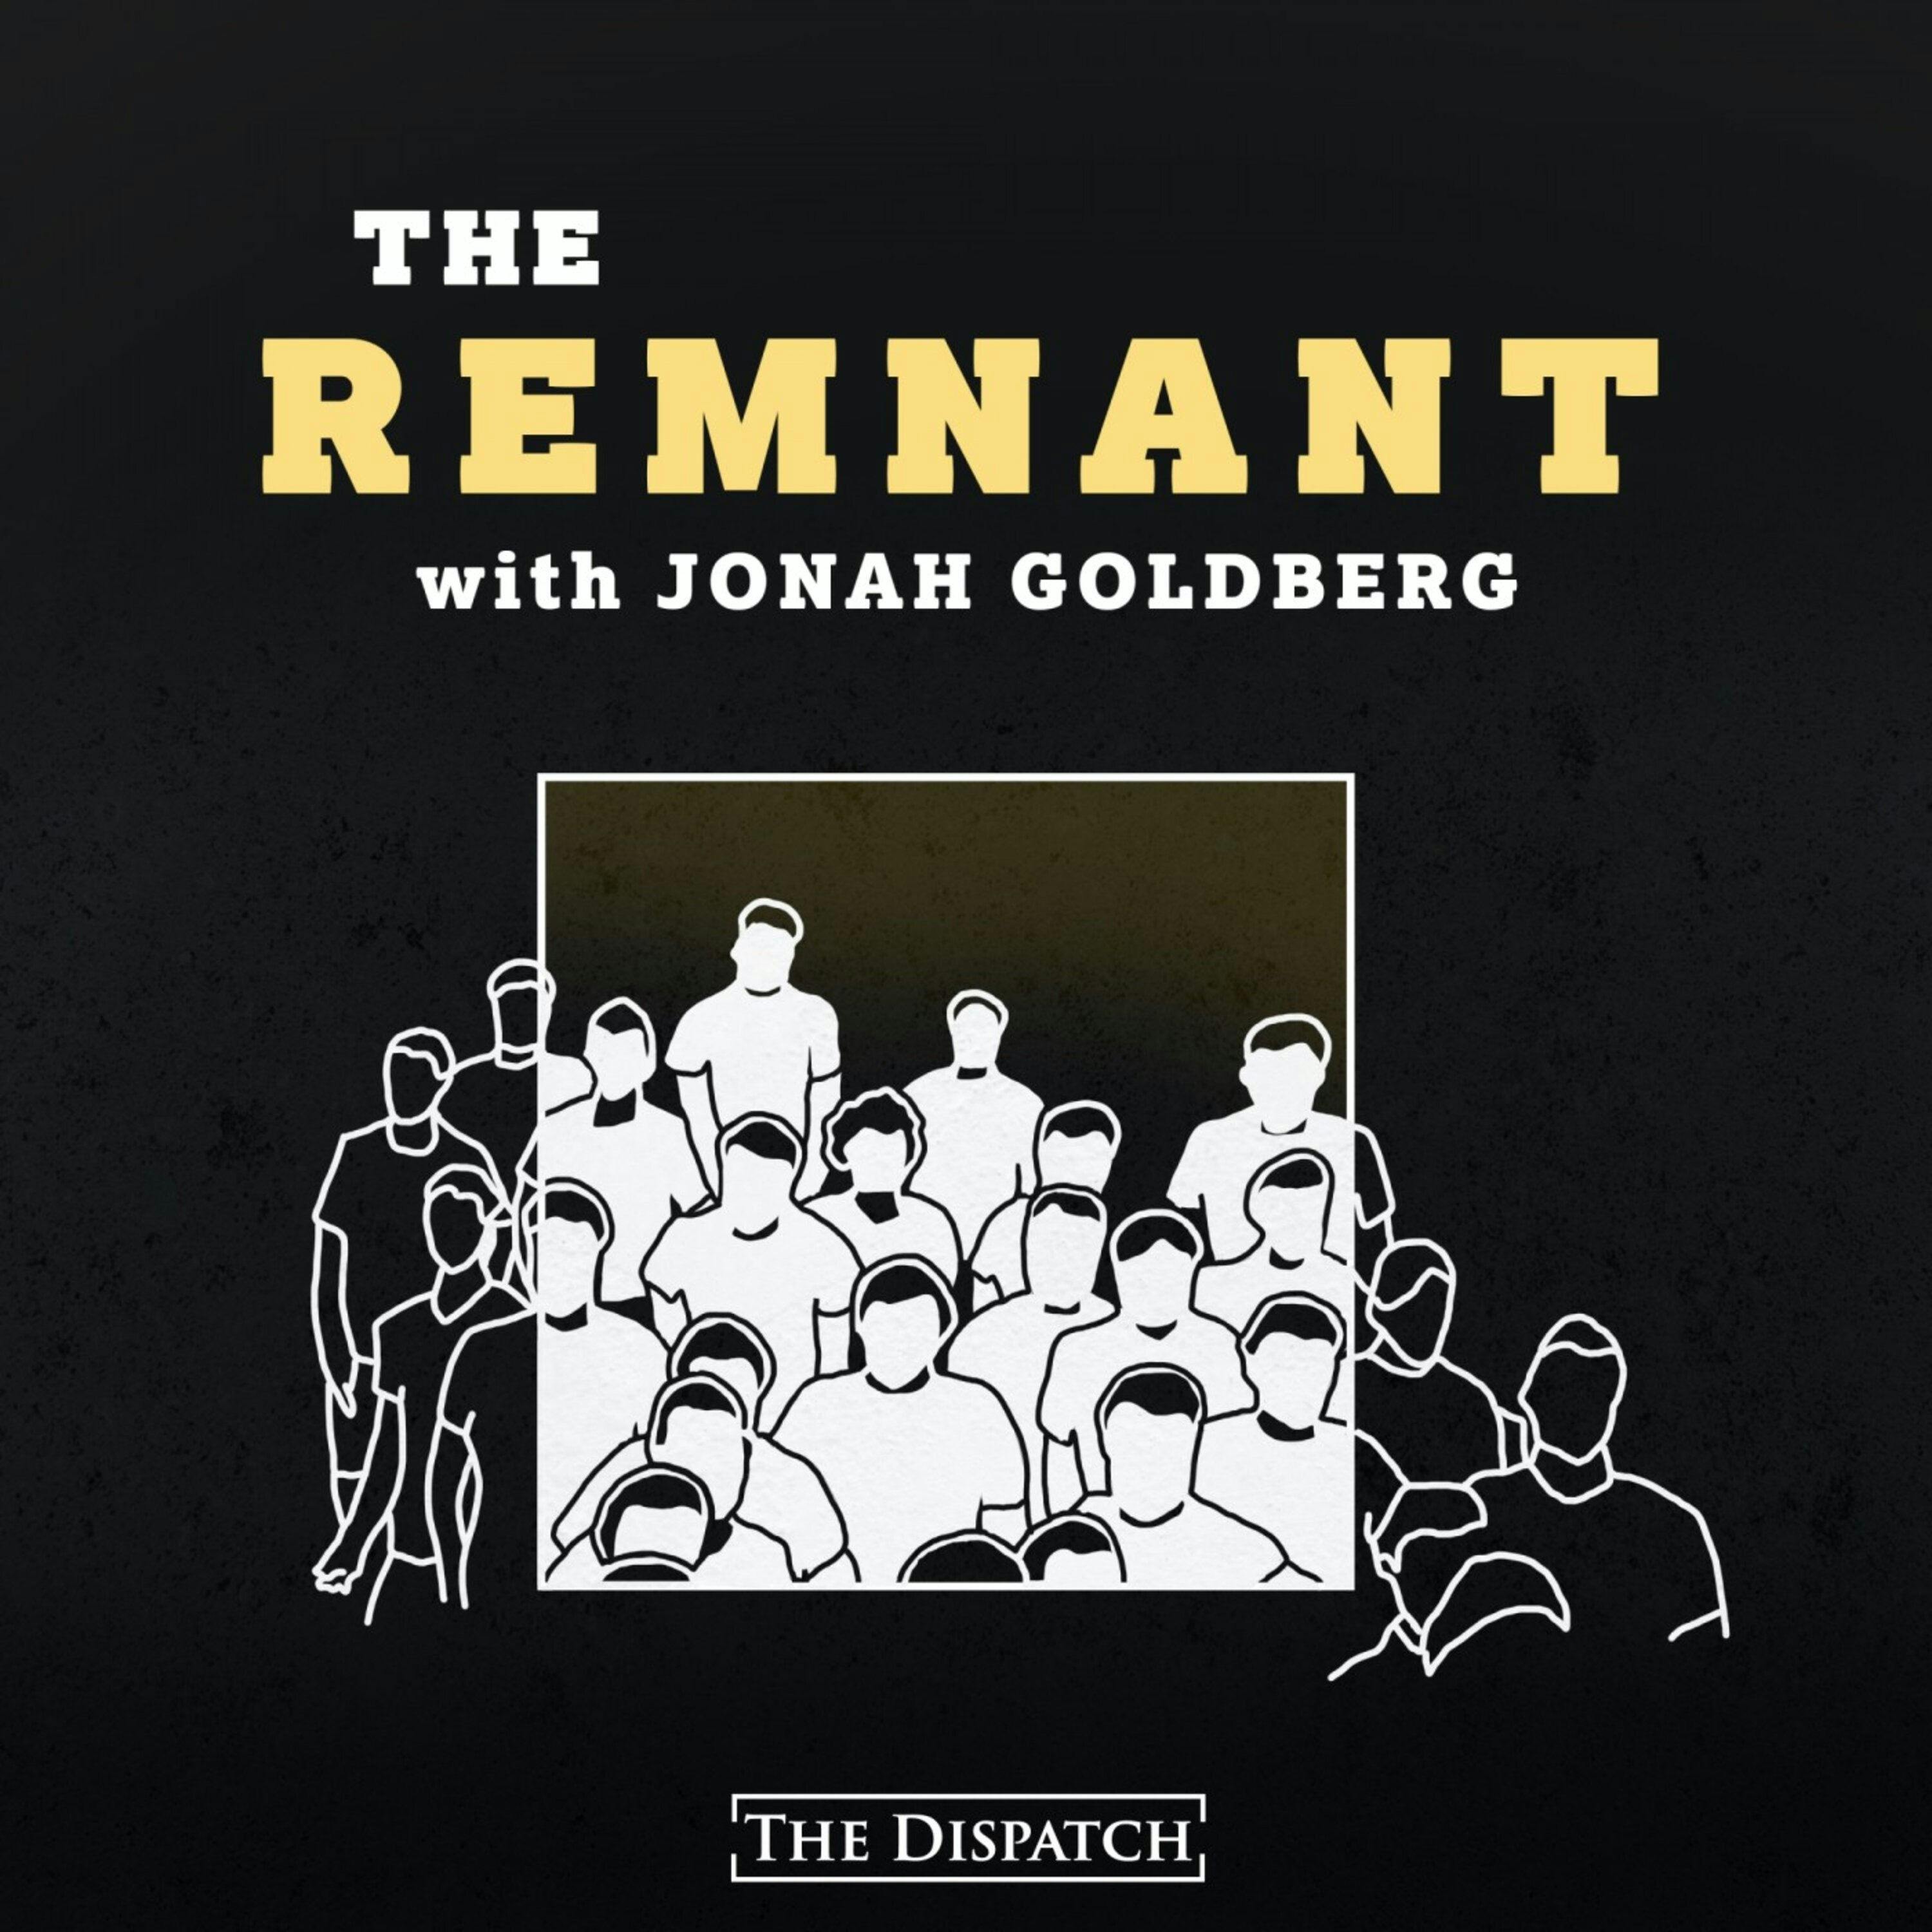 The Remnant with Jonah Goldberg podcast show image